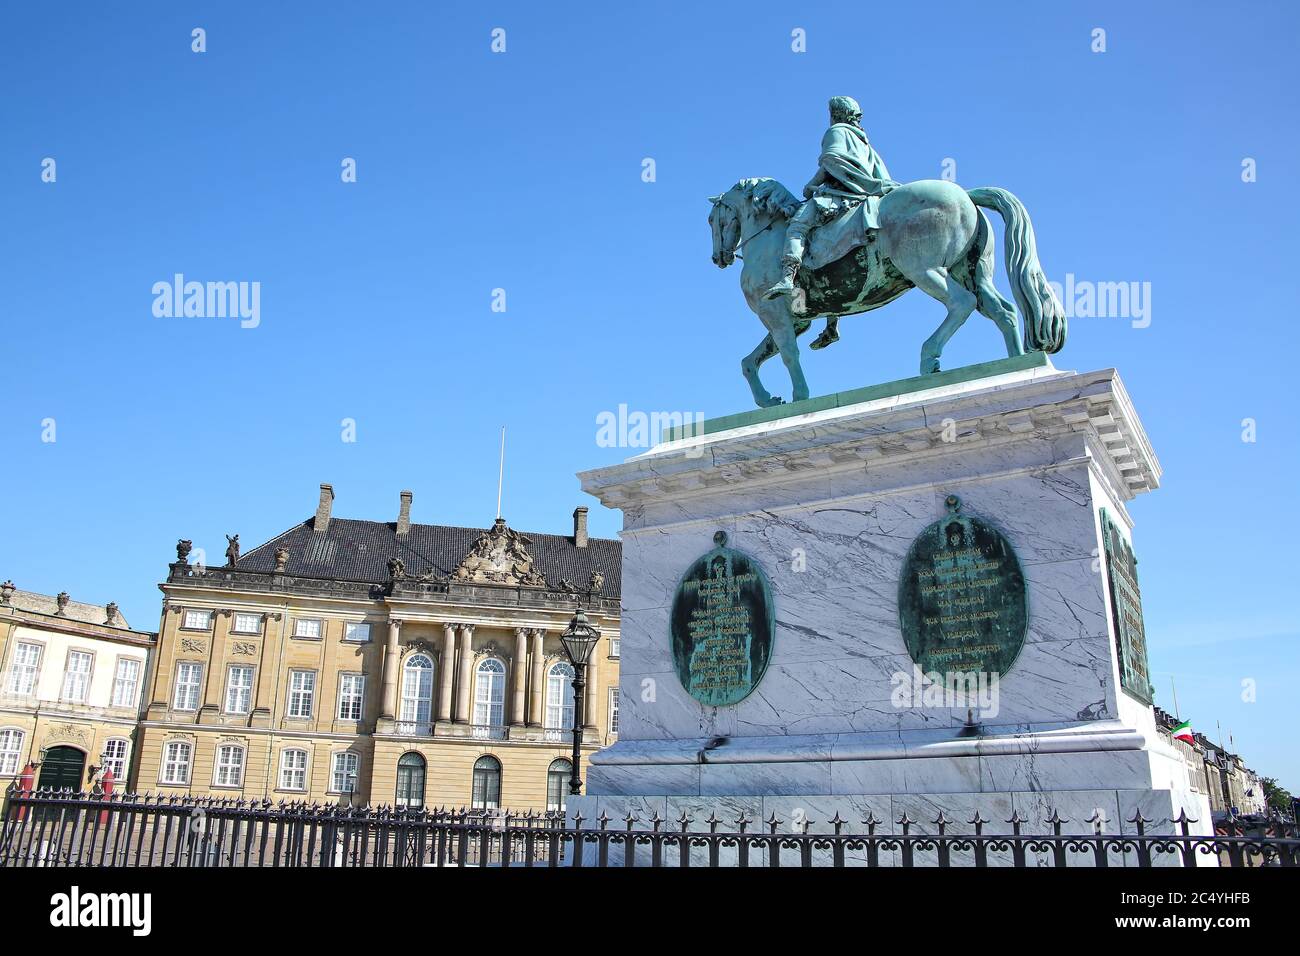 Amalienborg Palace Square with a statue of Frederick V on a horse. Copenhagen, Denmark. Stock Photo